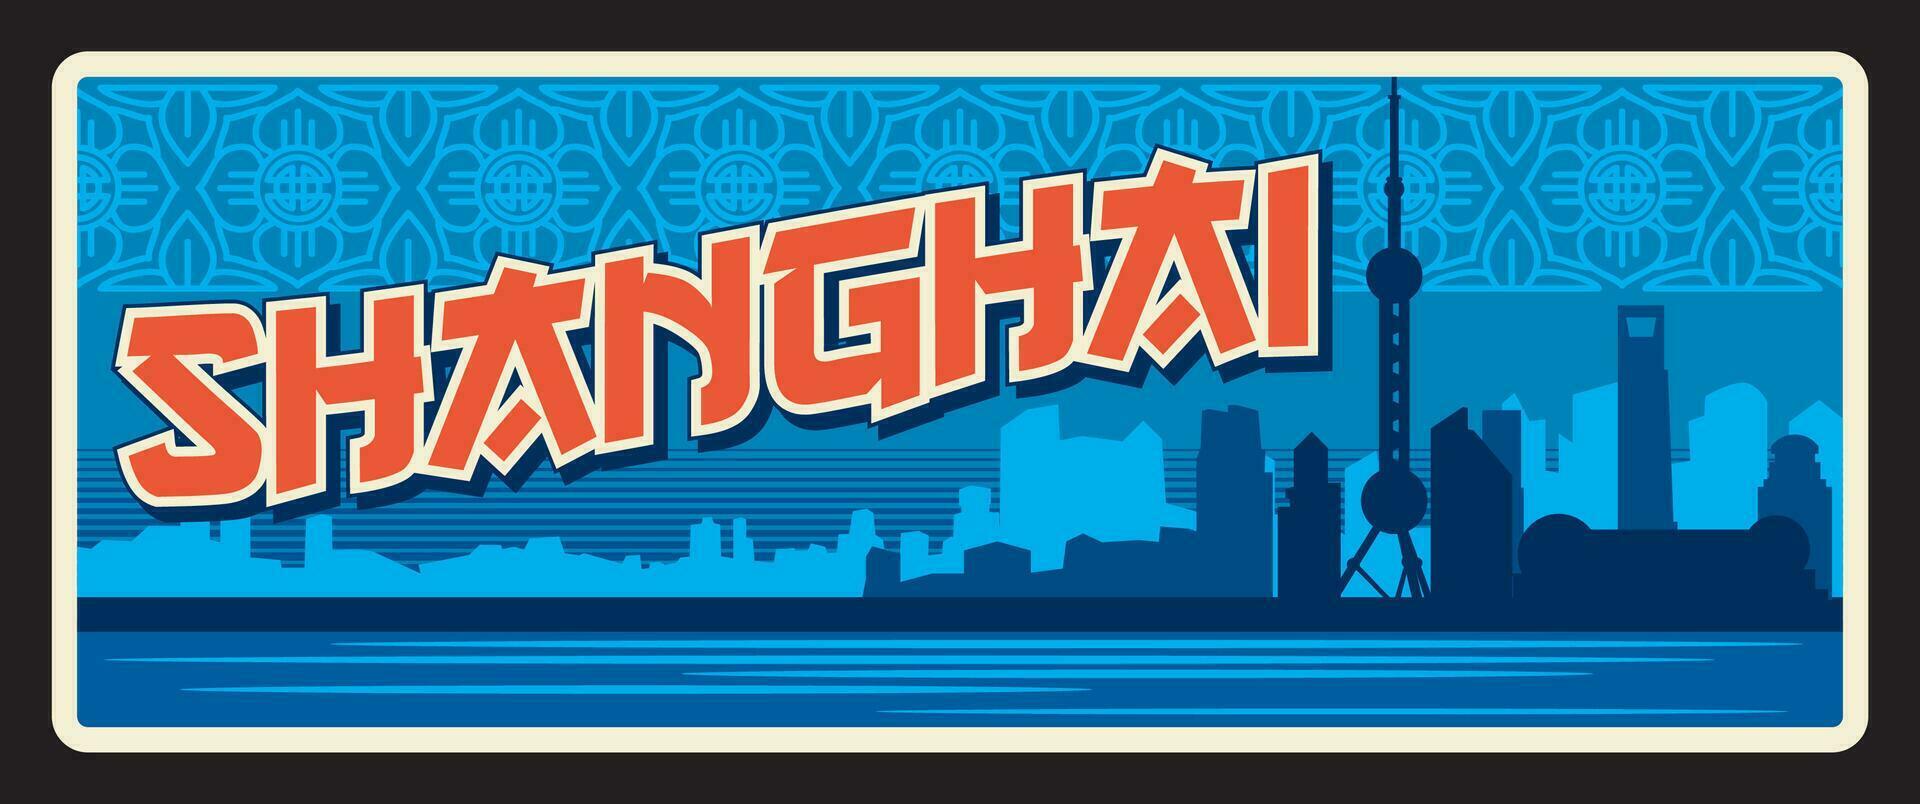 Shanghai city in China, Chinese travel sign vector